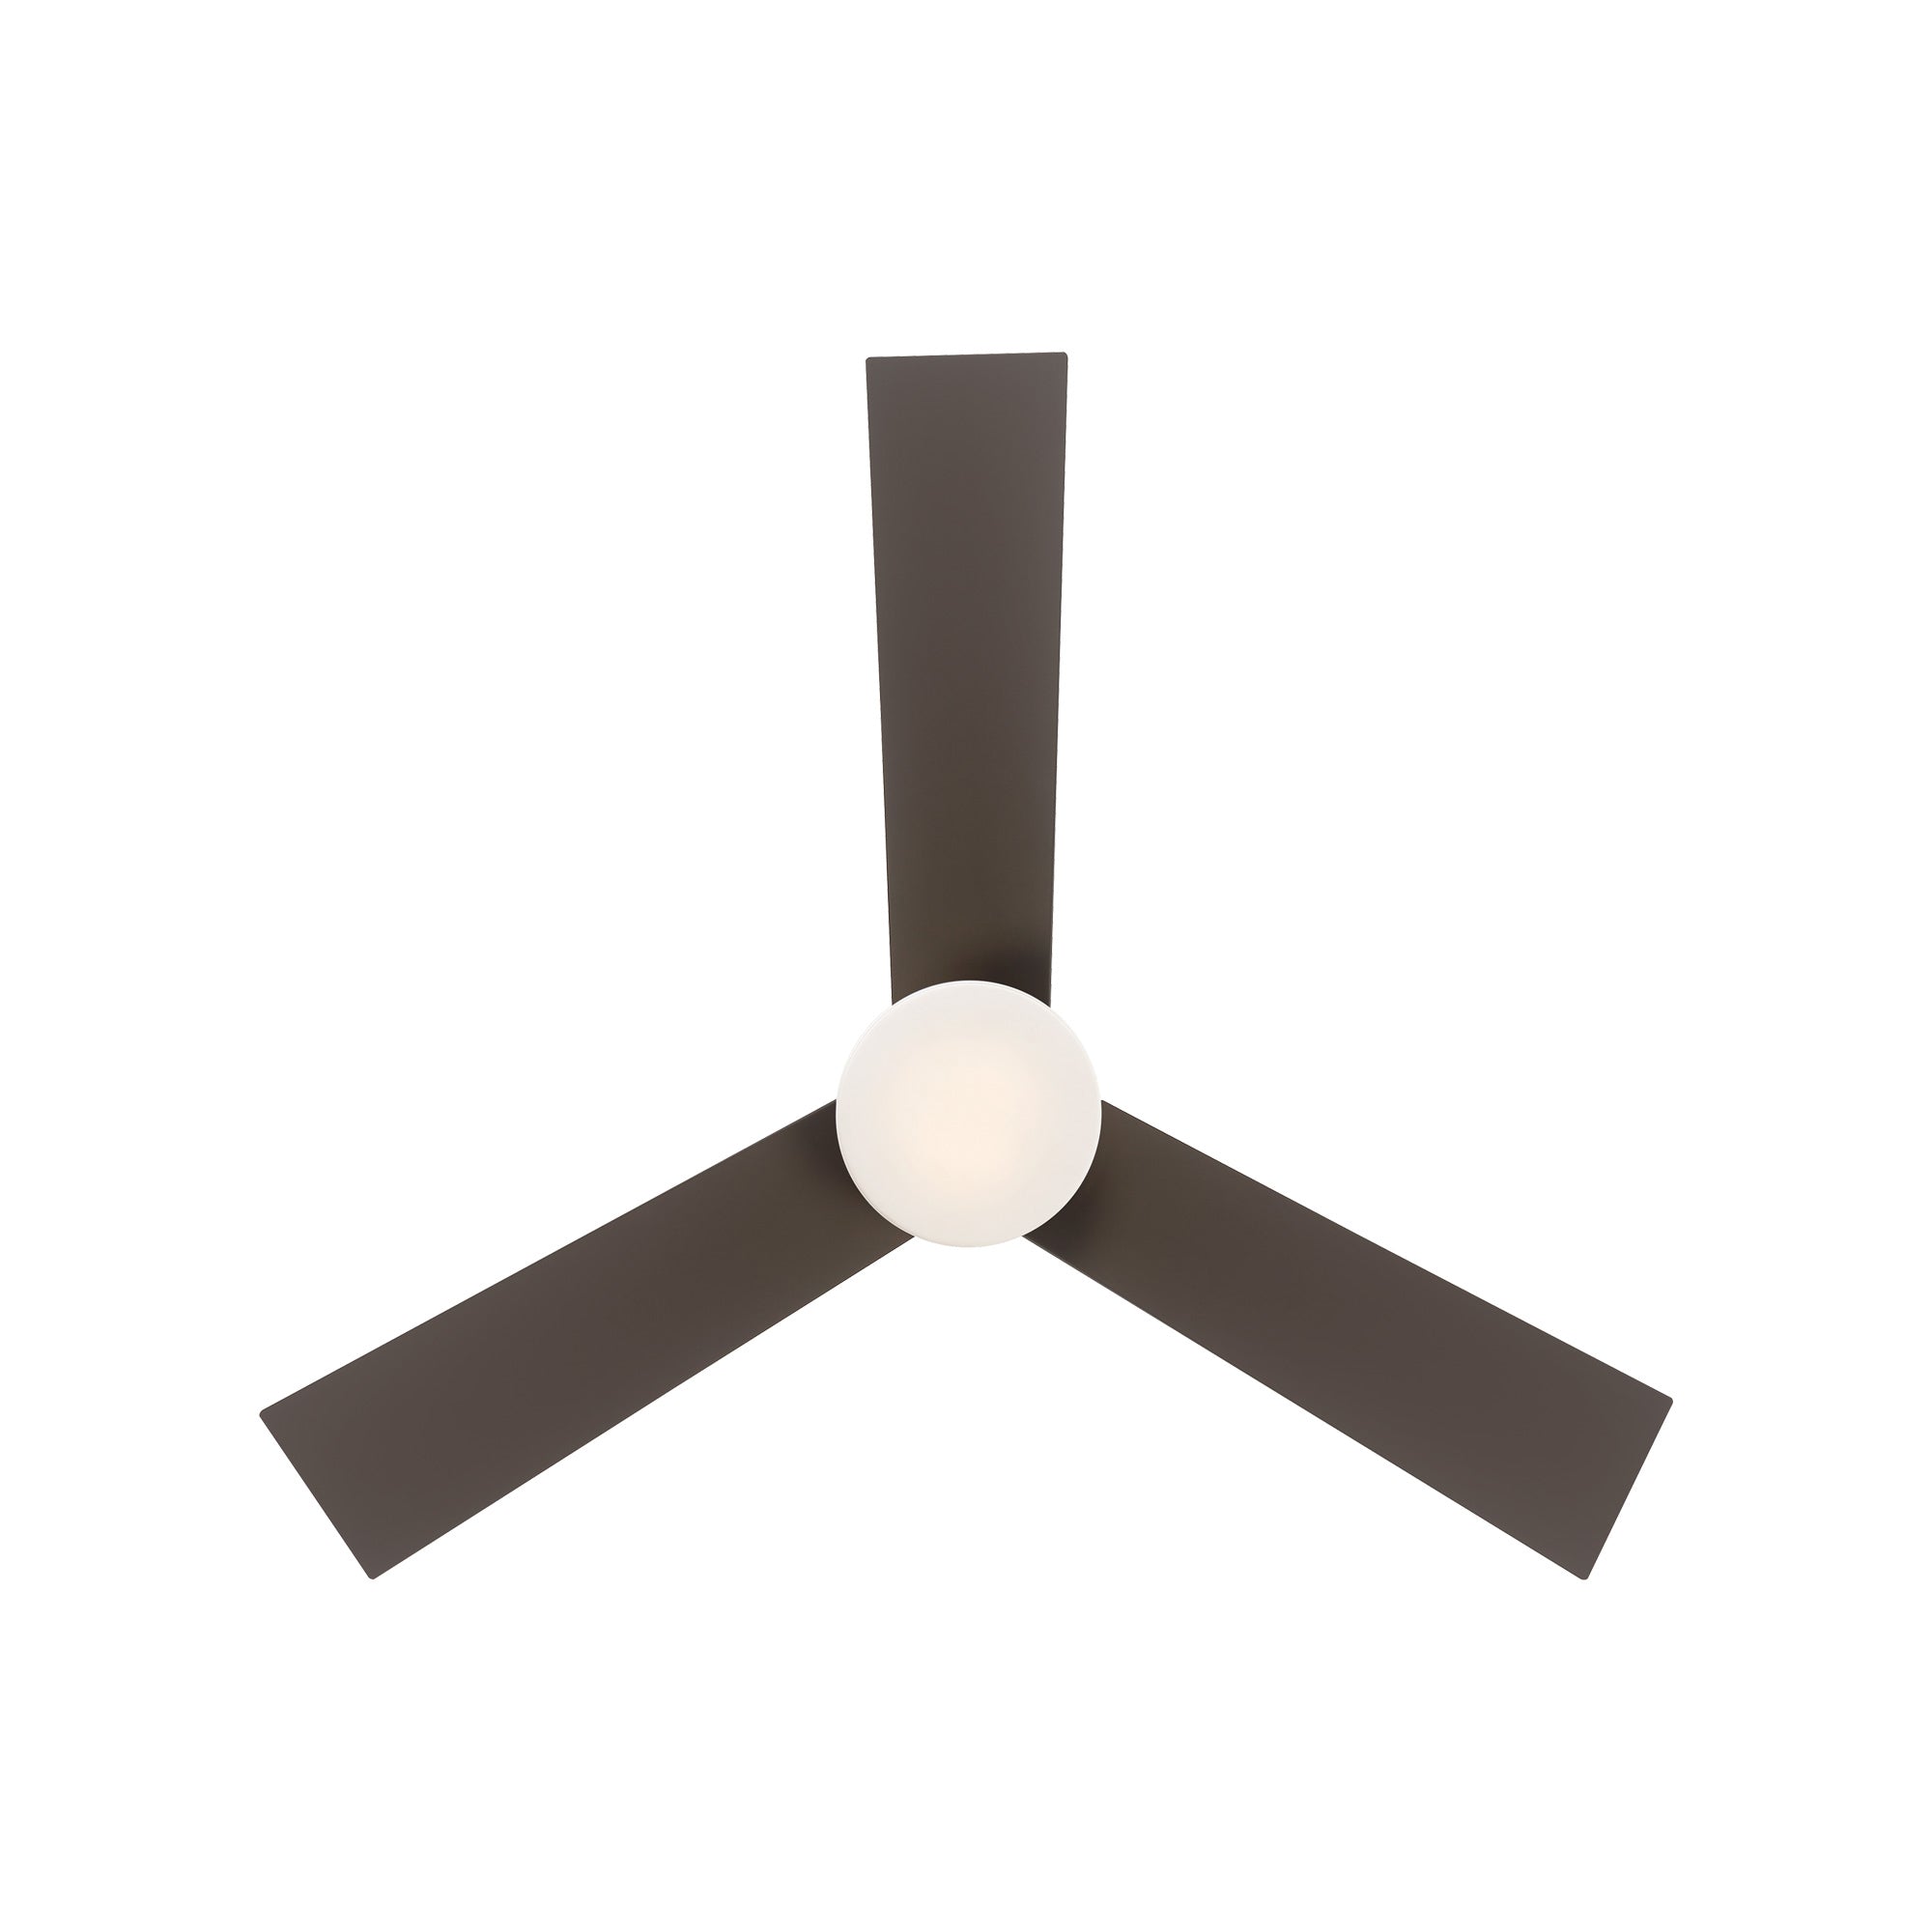 Axis Indoor/Outdoor 3-Blade 44" Smart Ceiling Fan with LED Light Kit and Remote Control